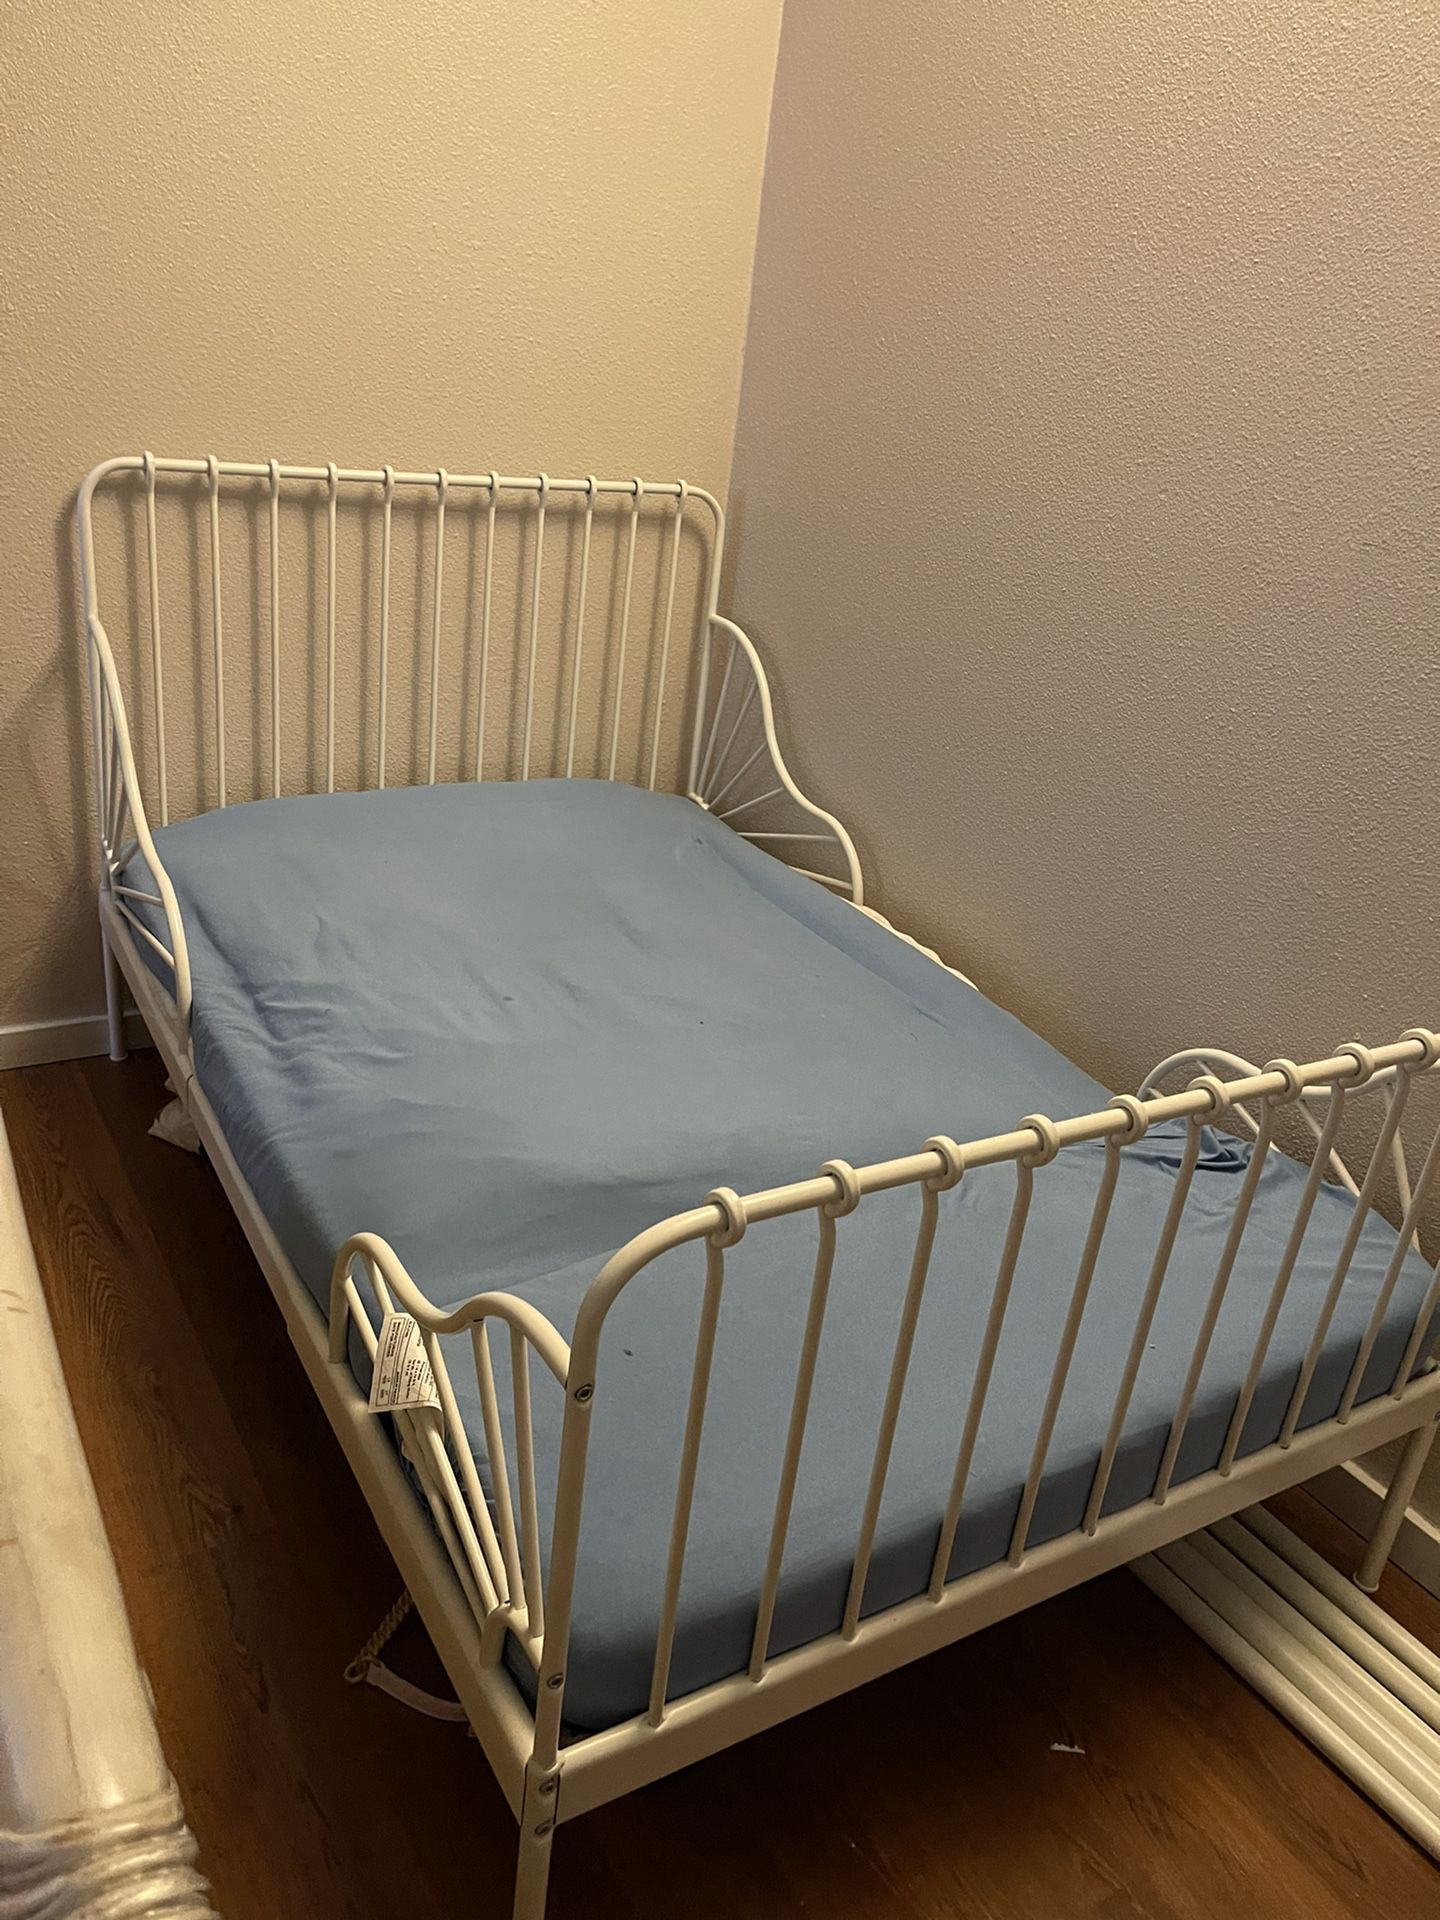 Toddler bed from IKEA 